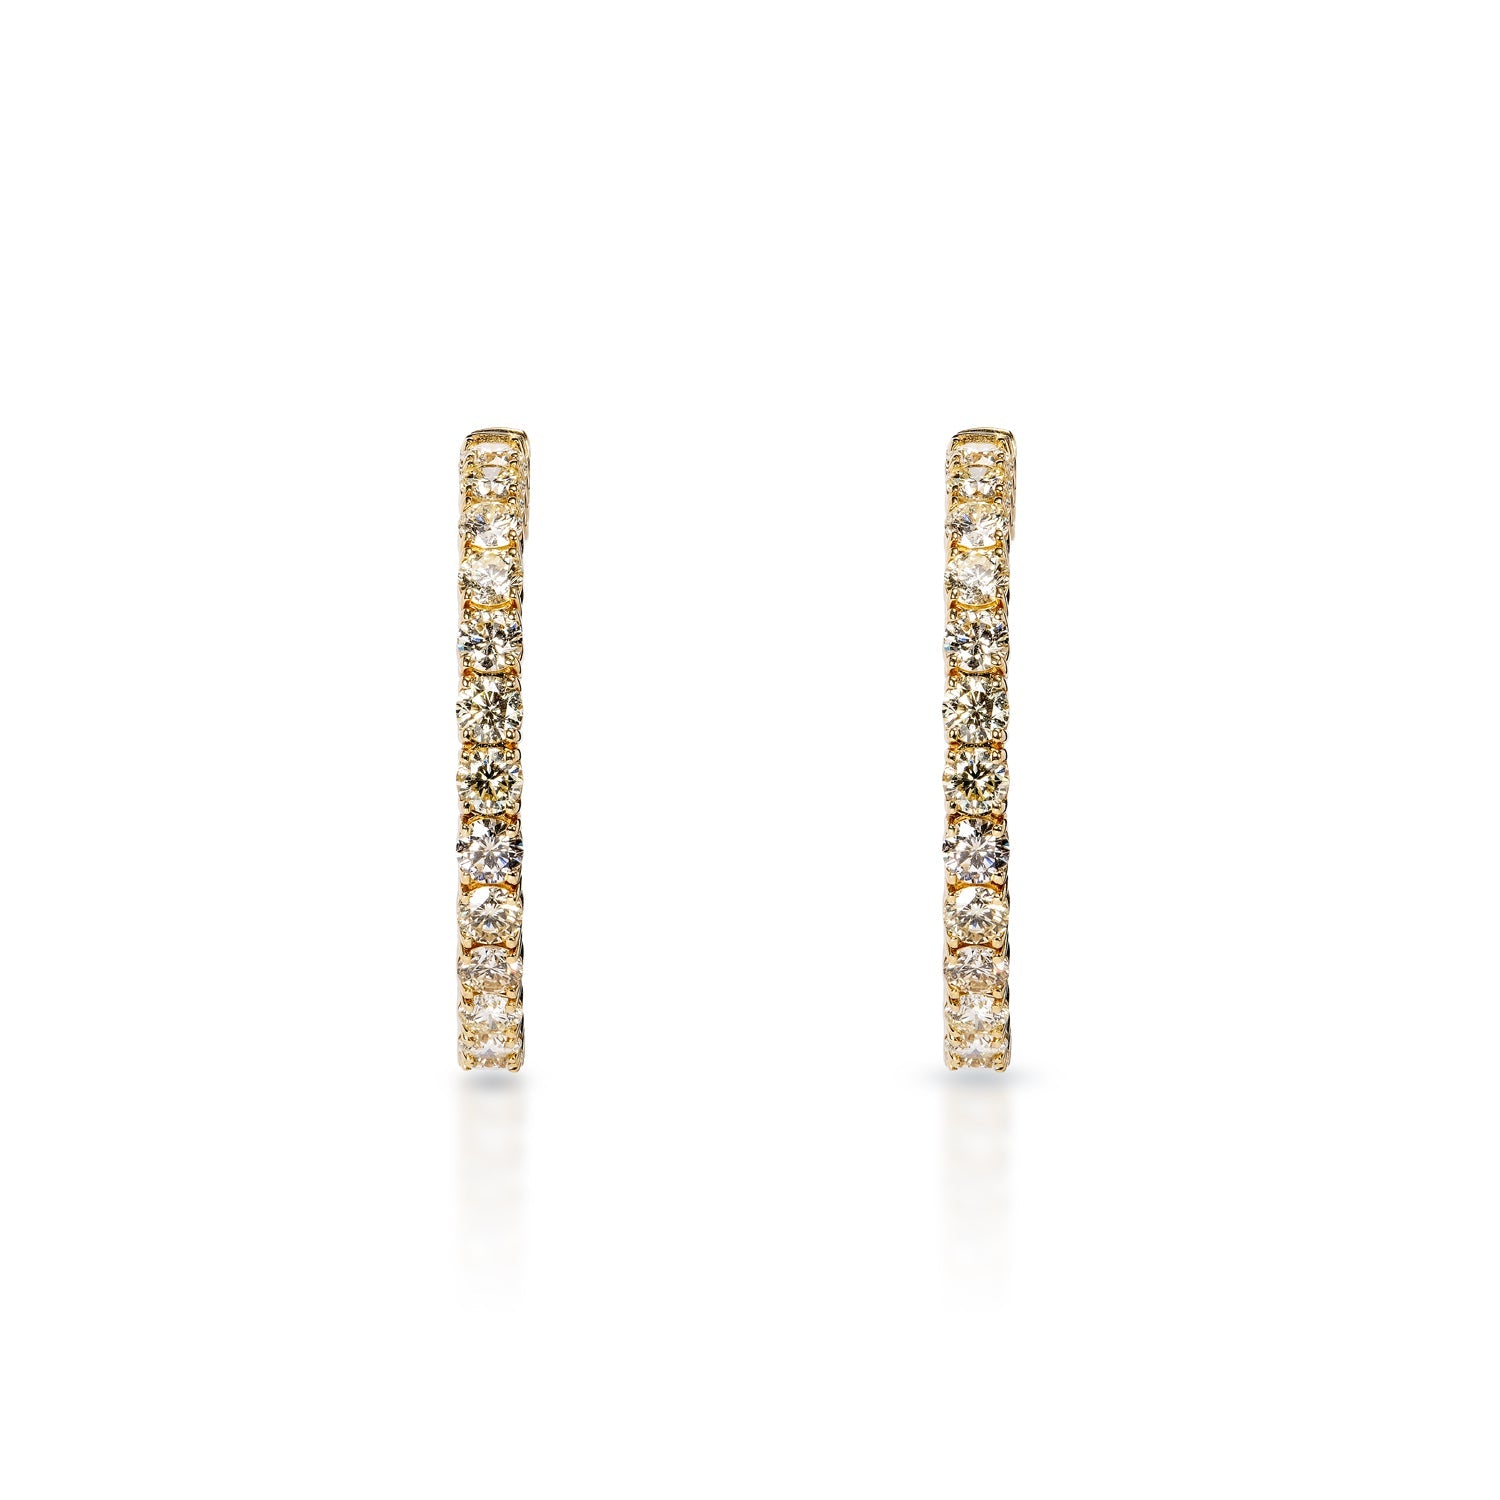 Ariel 10 Carat Round Brilliant Diamond Hoop Earrings in 14k Yellow Gold Front View